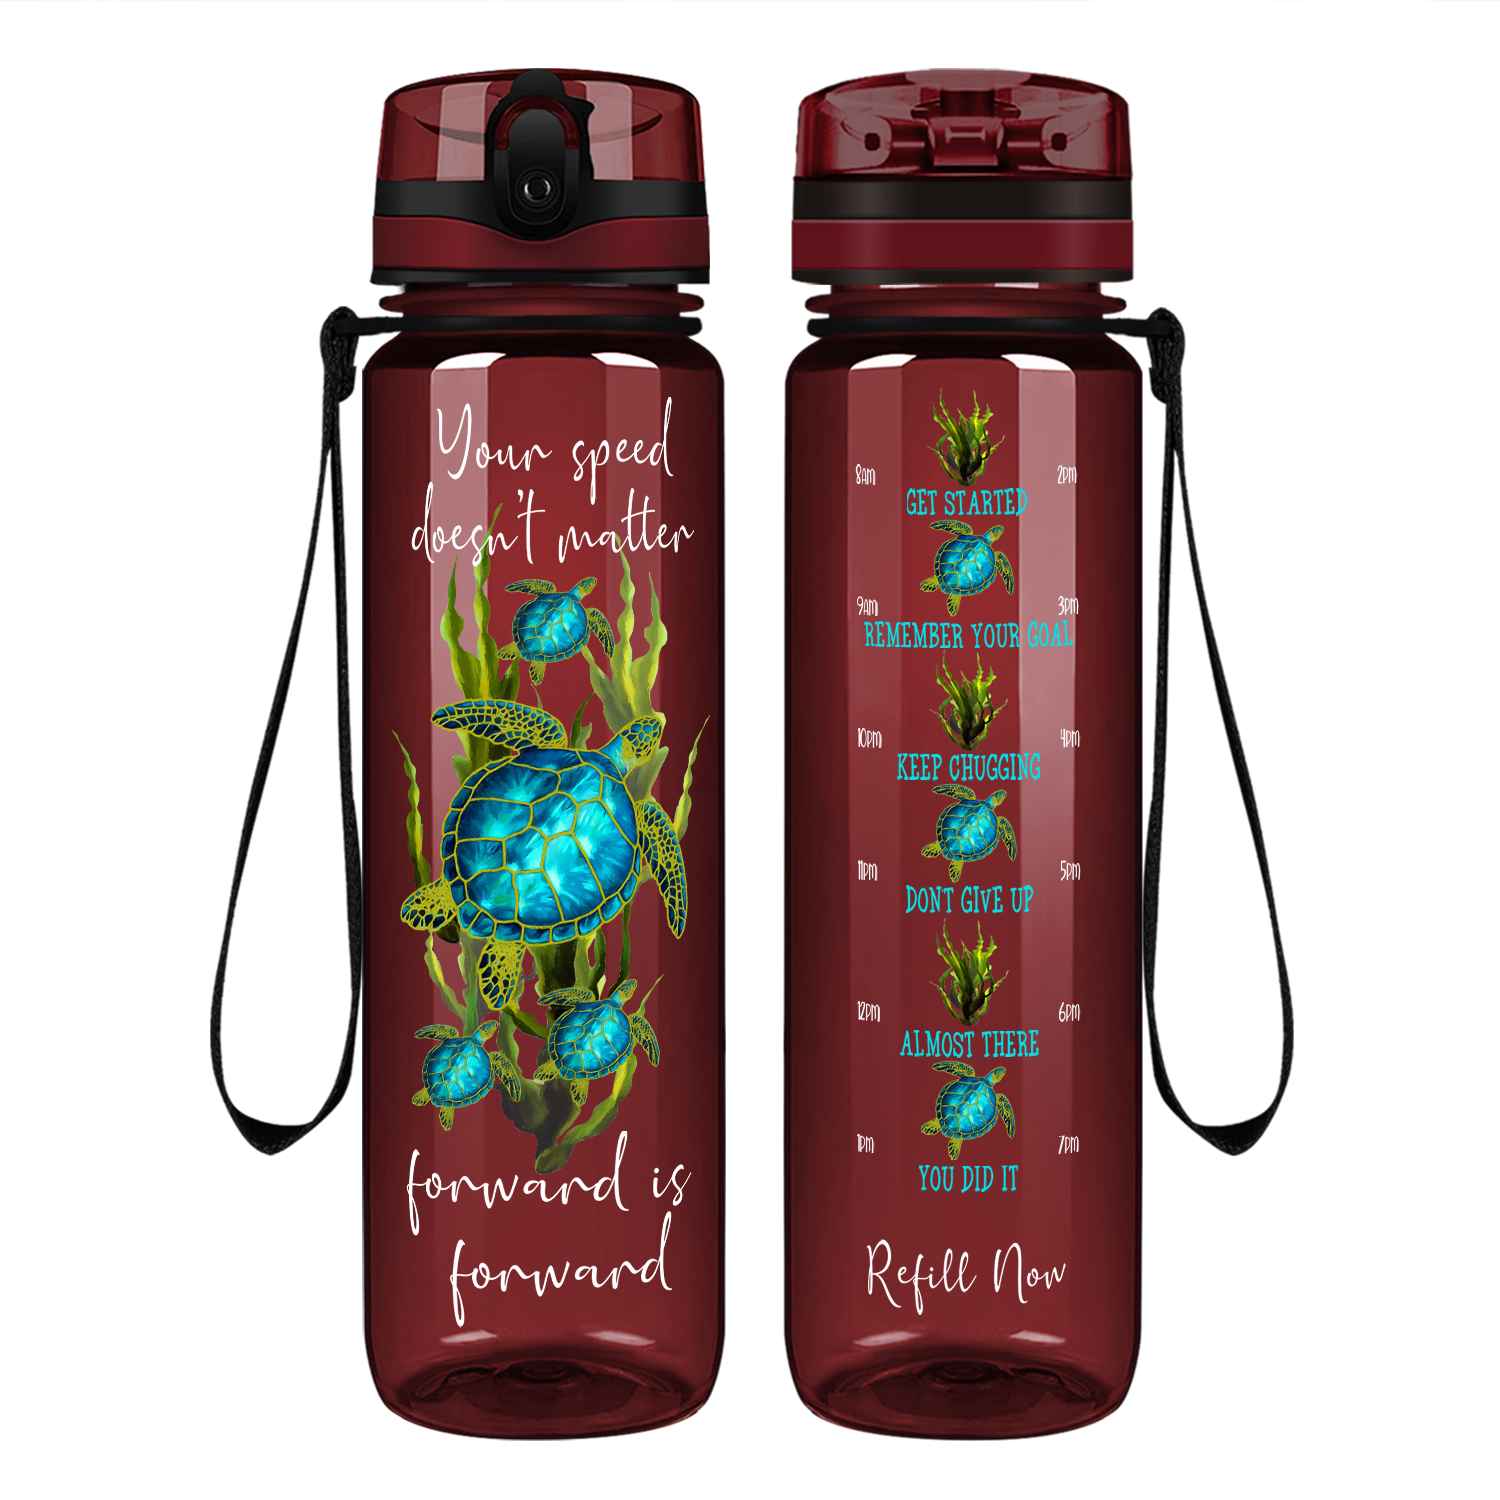 Your Speed Doesn't Matter Forward Is Forward on 32 oz Motivational Tracking Water Bottle